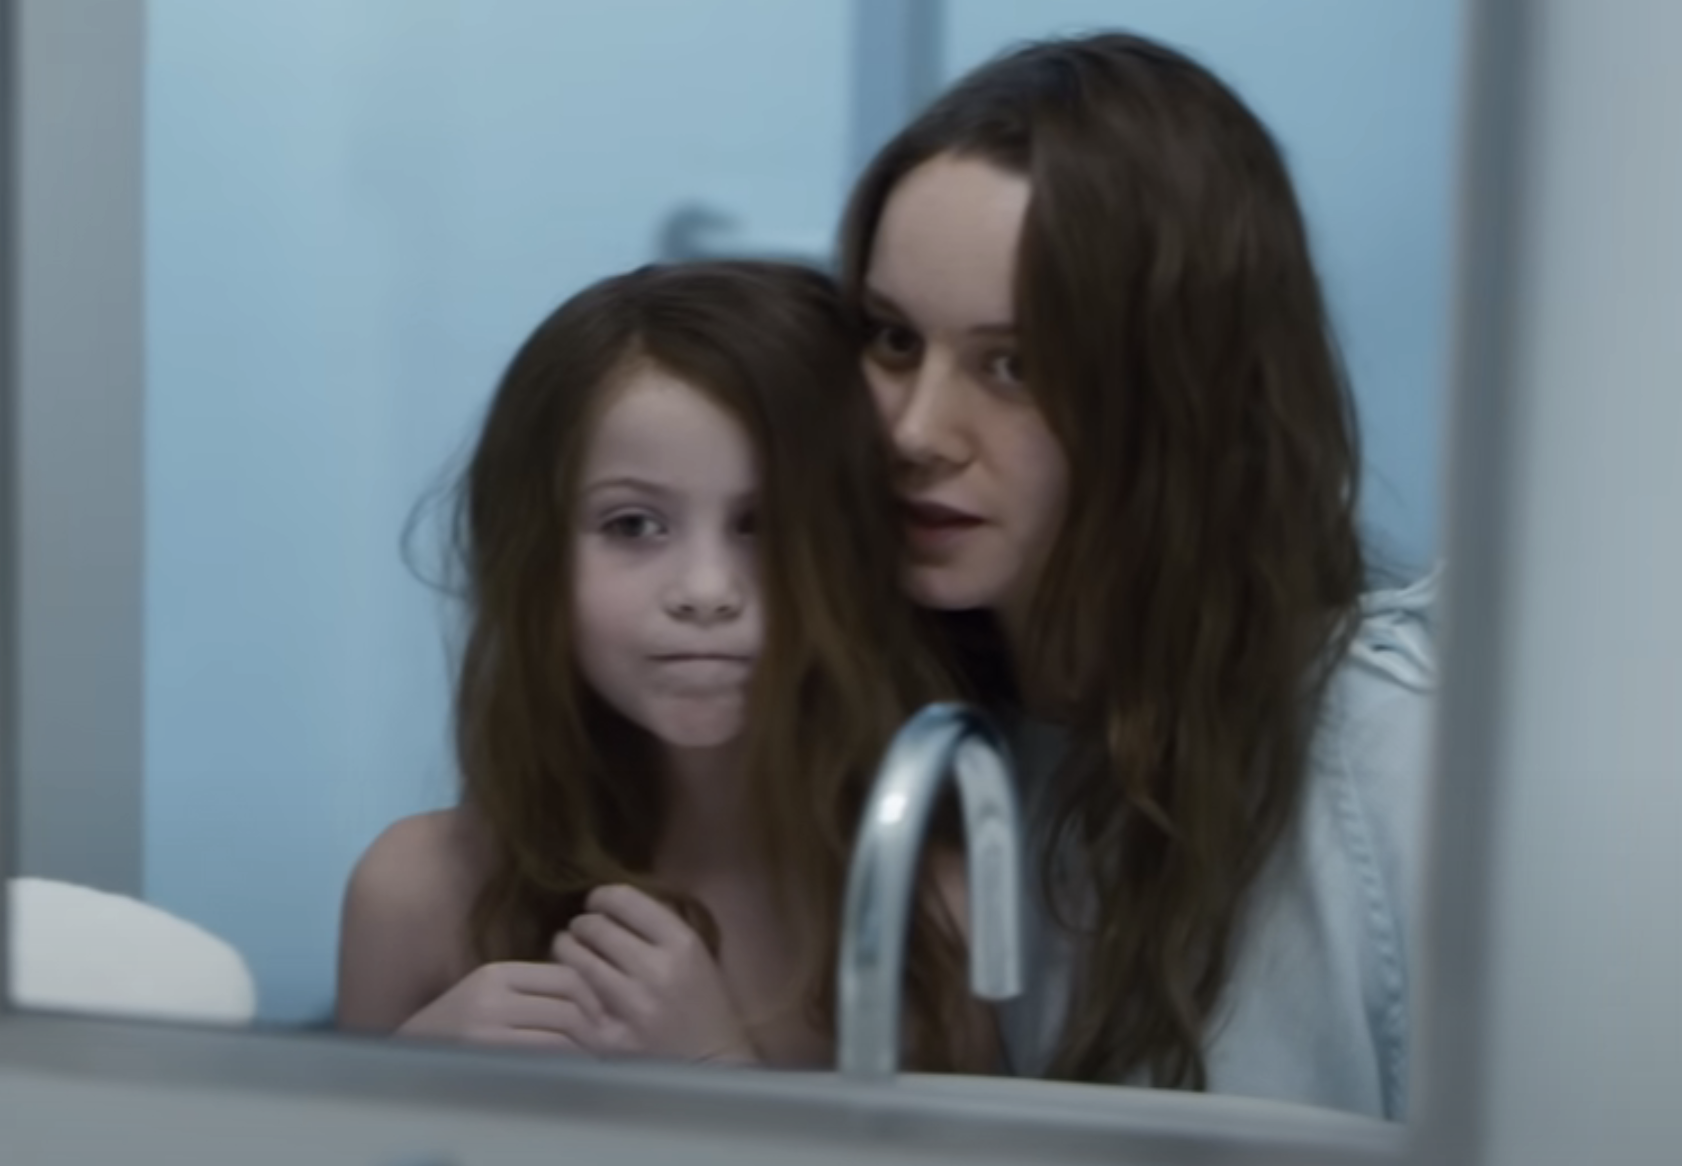 Brie Larson and Jacob Tremblay look at a mirror in a scene from Room